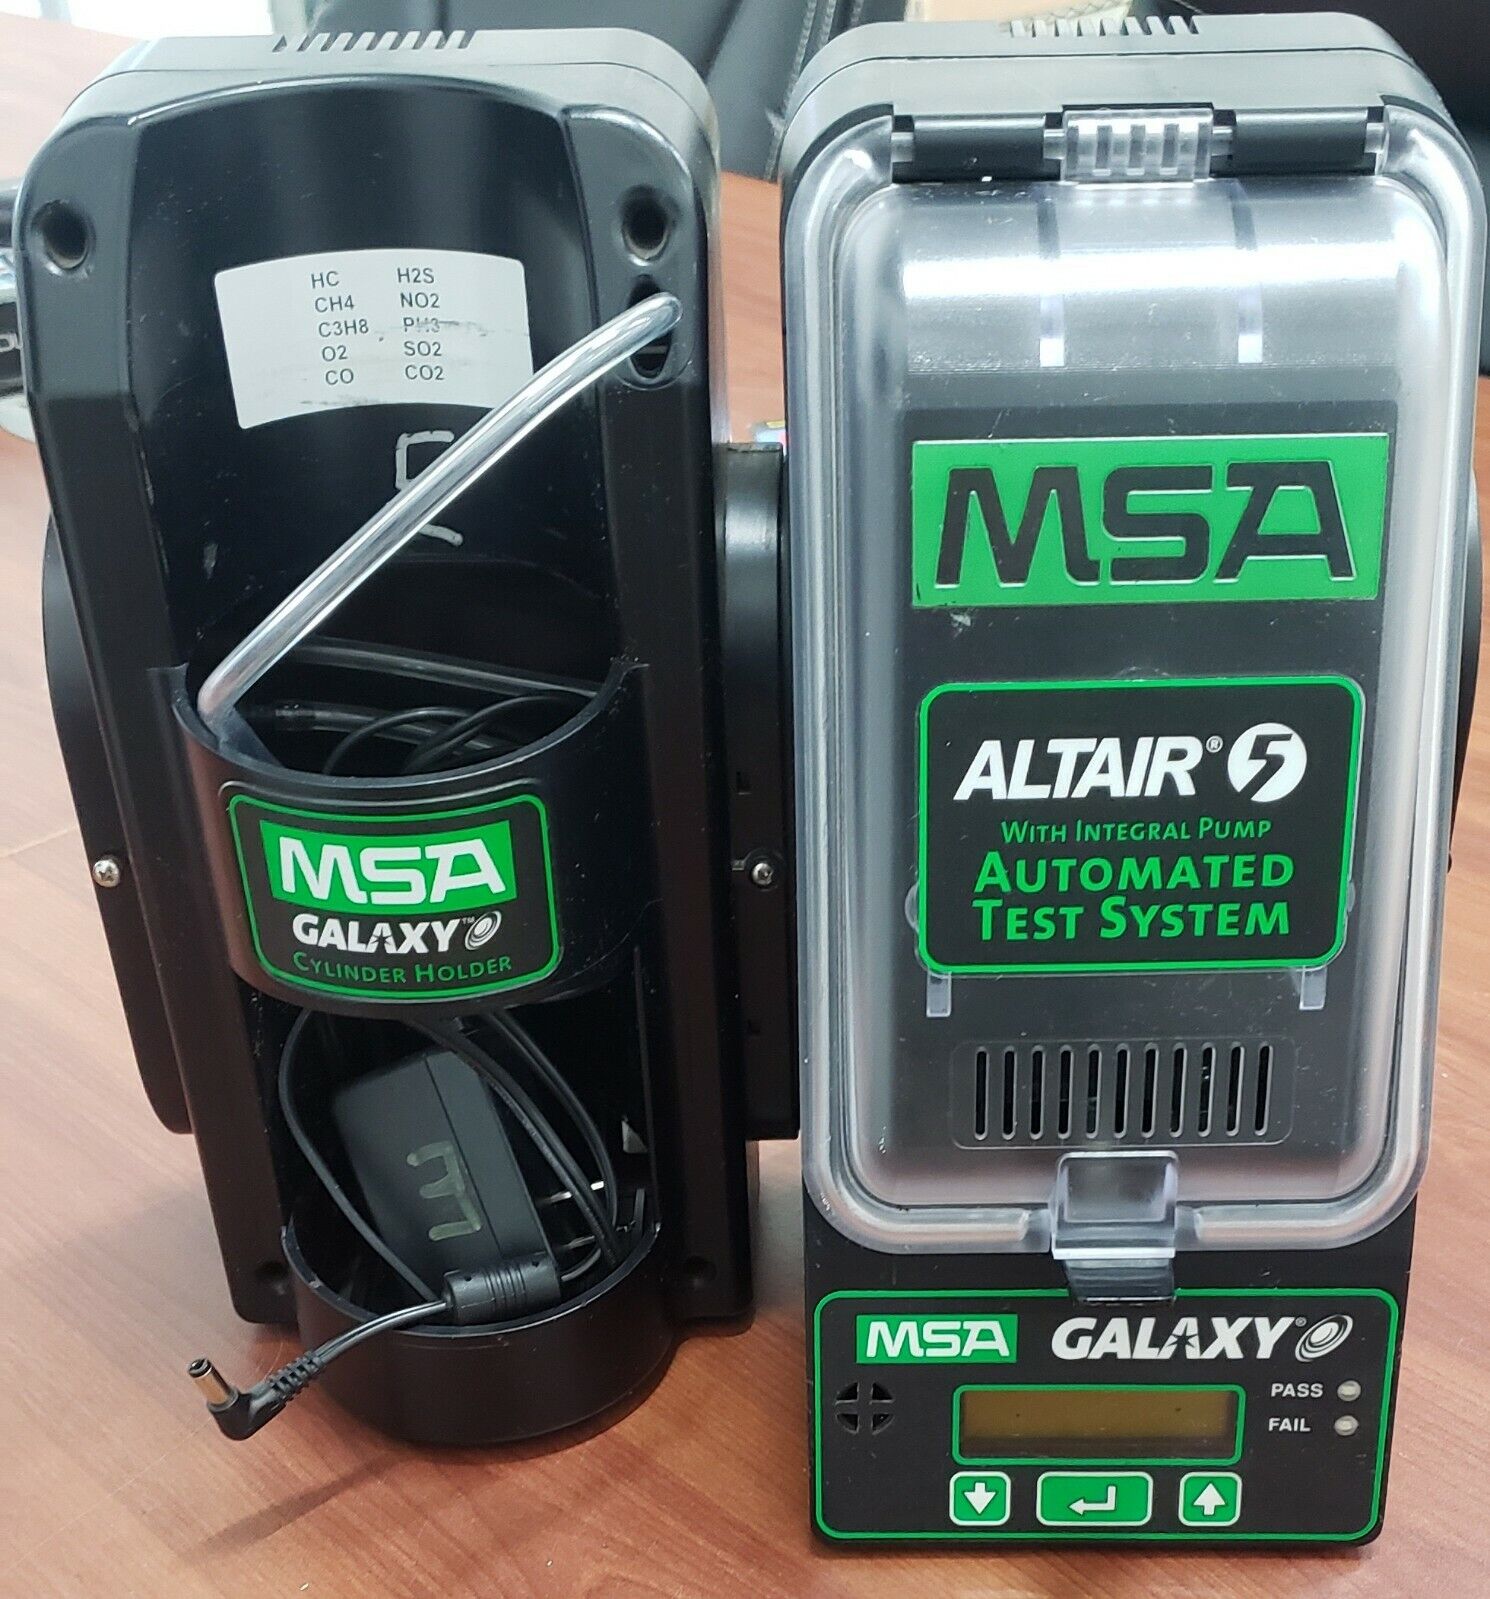 MSA Galaxy ALTAIR 5 Automated Gas Test System and Cylinder Holder